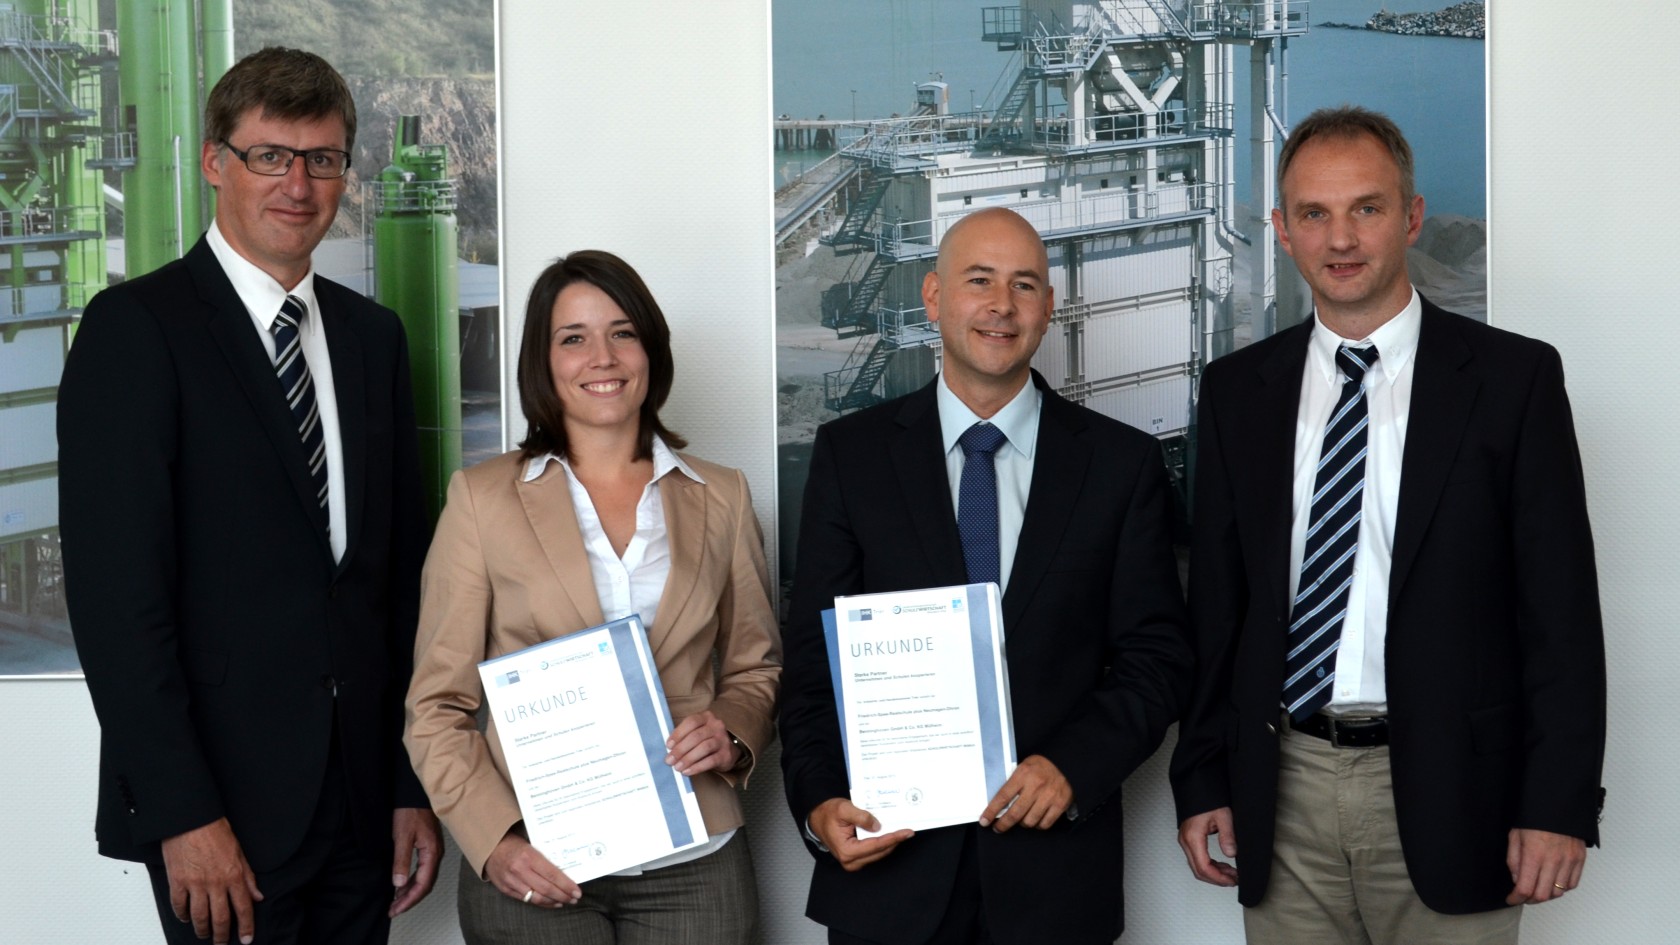 In Mülheim an der Mosel, the Friedrich-Spee Realschule Plus Neumagen-Drhon and BENNINGHOVEN have signed a collaboration agreement.